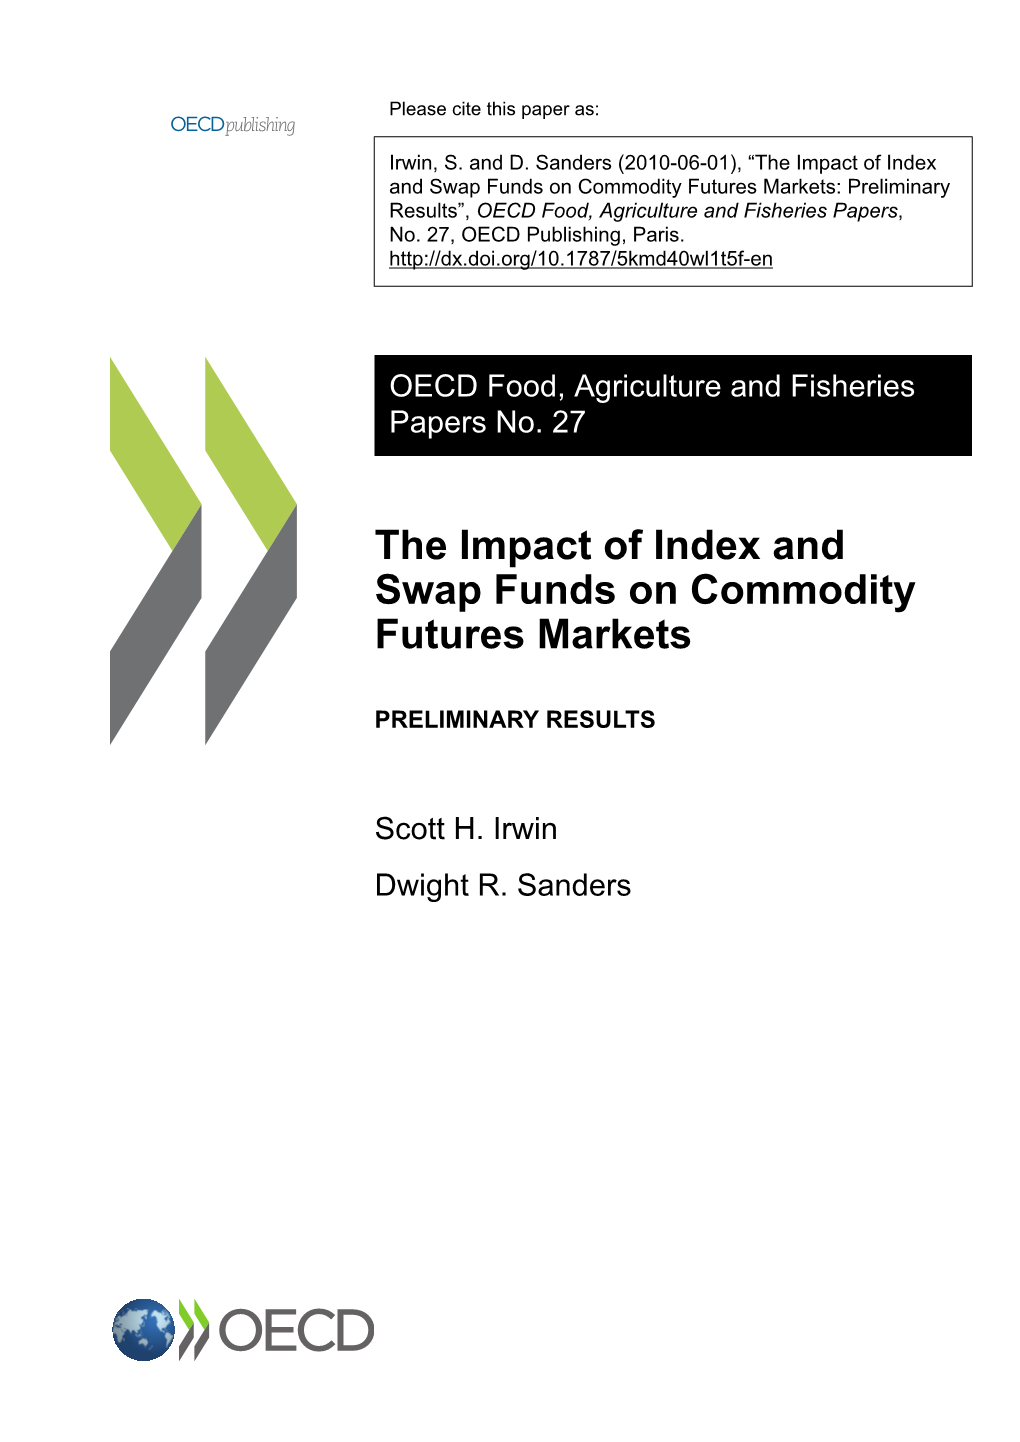 The Impact of Index and Swap Funds on Commodity Futures Markets: Preliminary Results”, OECD Food, Agriculture and Fisheries Papers, No